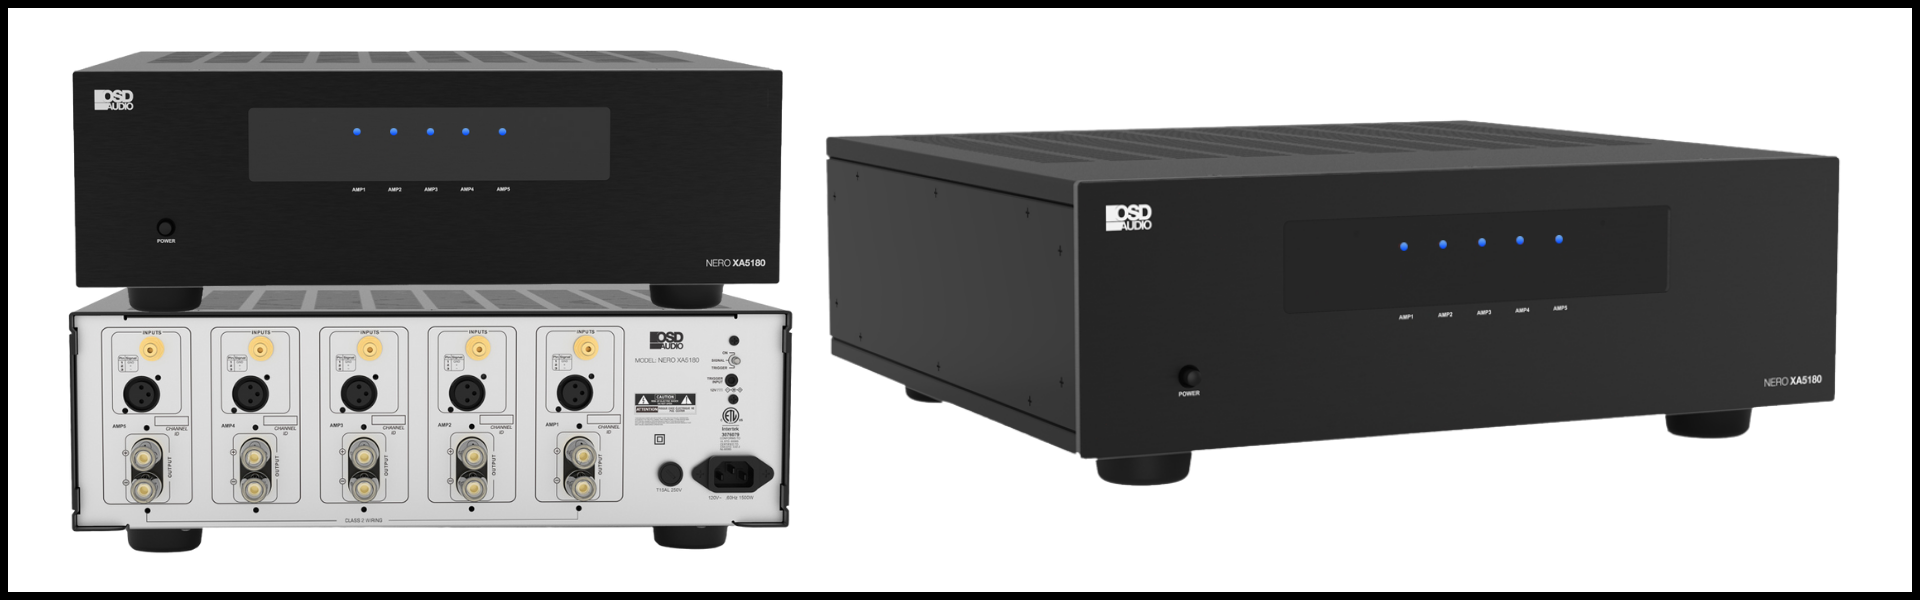 Images showcasing the front and back of the Nero XA5180 Home Theater Amplifier